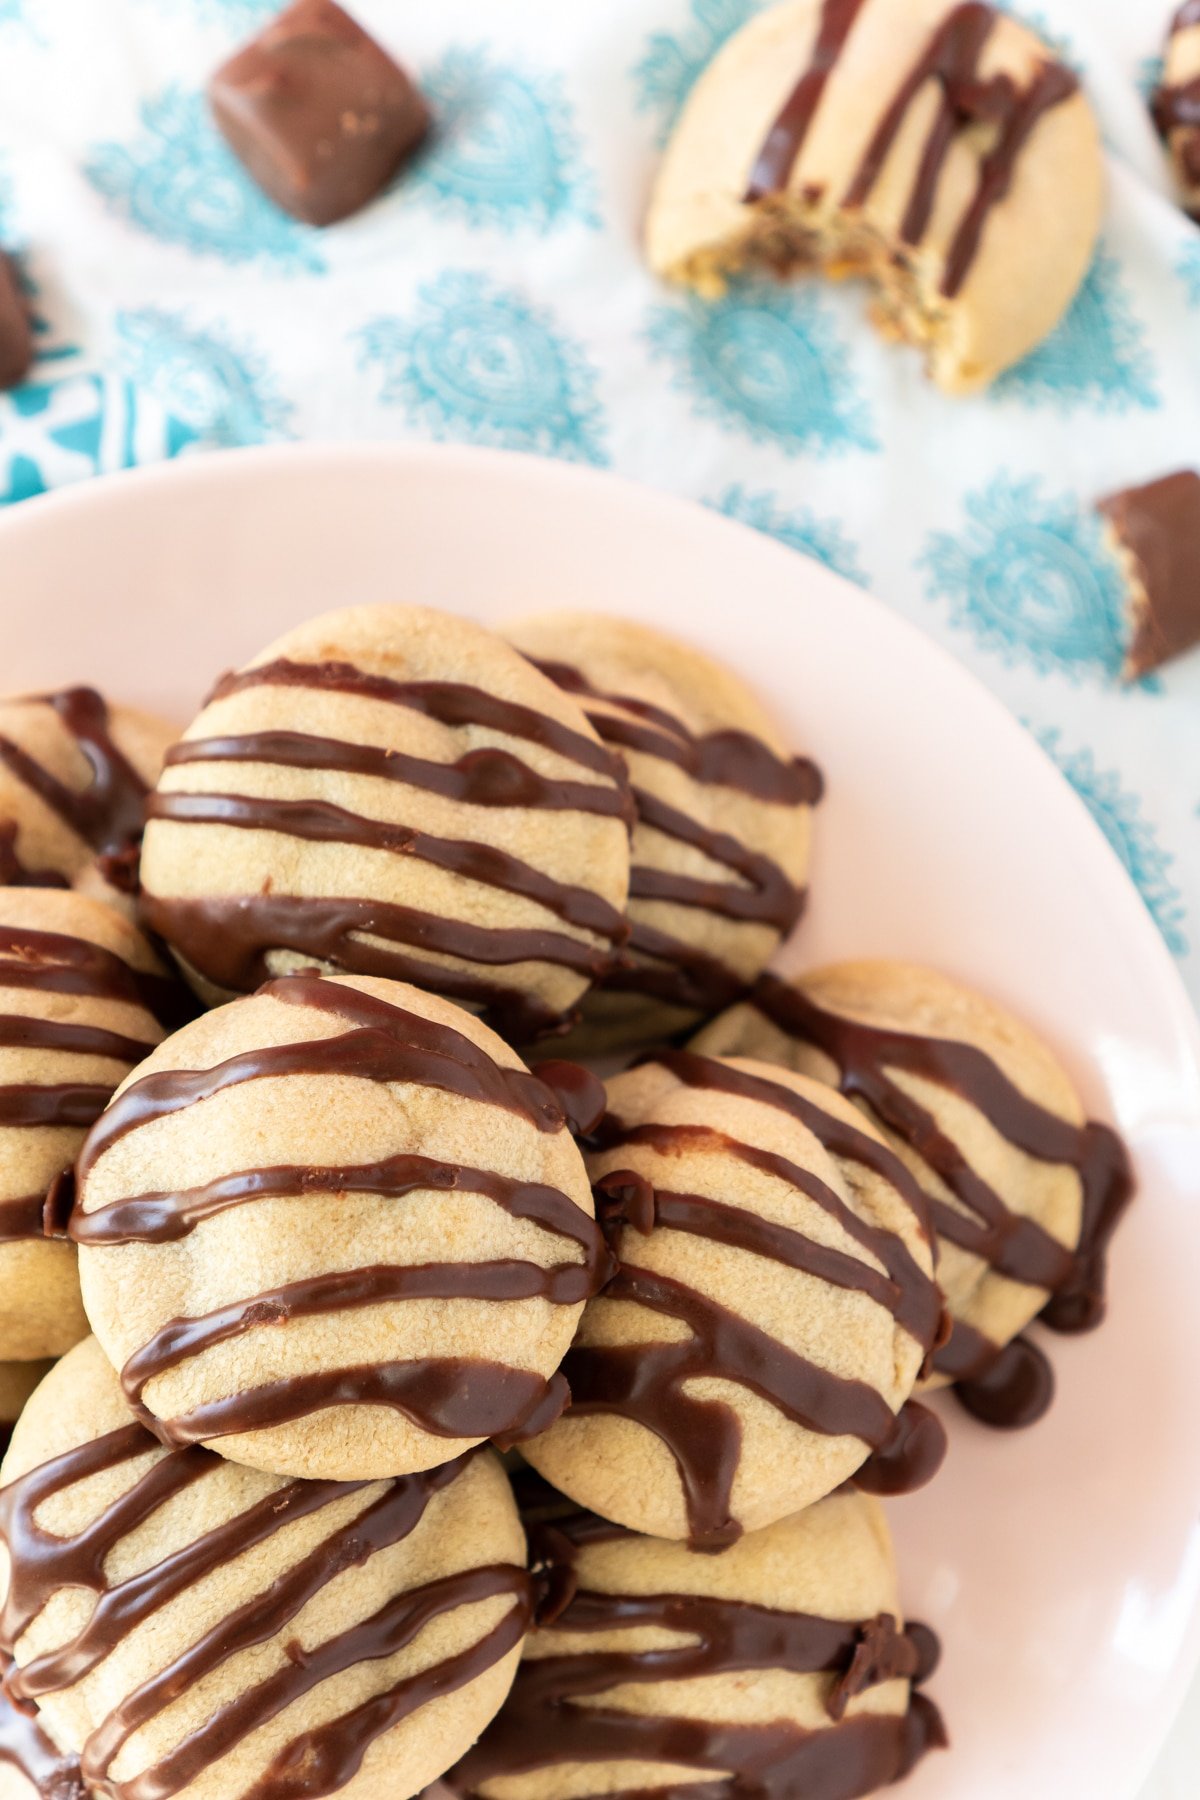 Plate of snickers cookies with chocolate drizzled on them